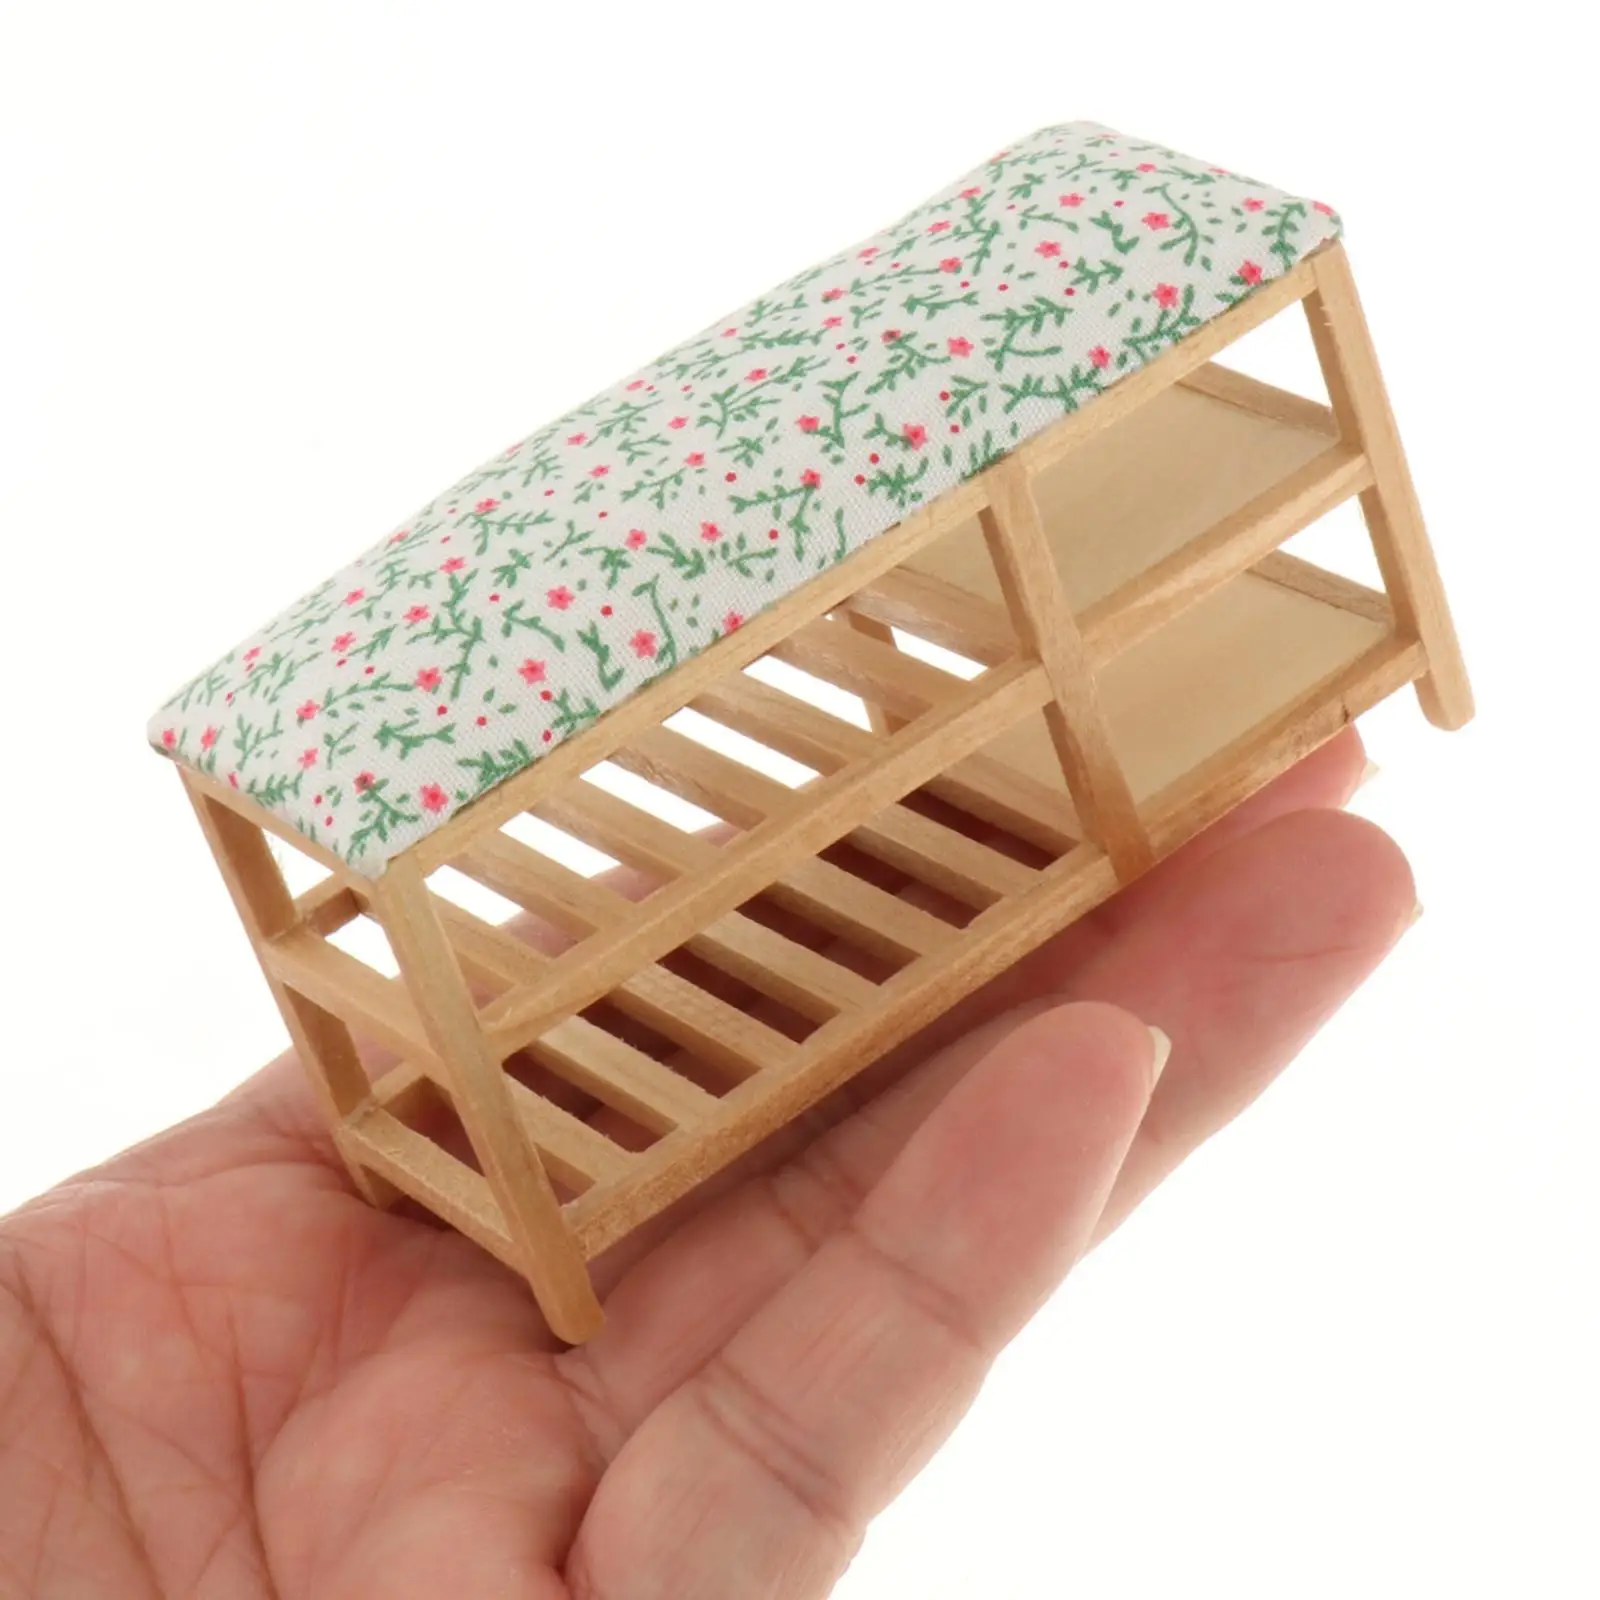 1/12 Dollhouse Miniature Shoe Rack Bench Pretend Play for Home Ornaments